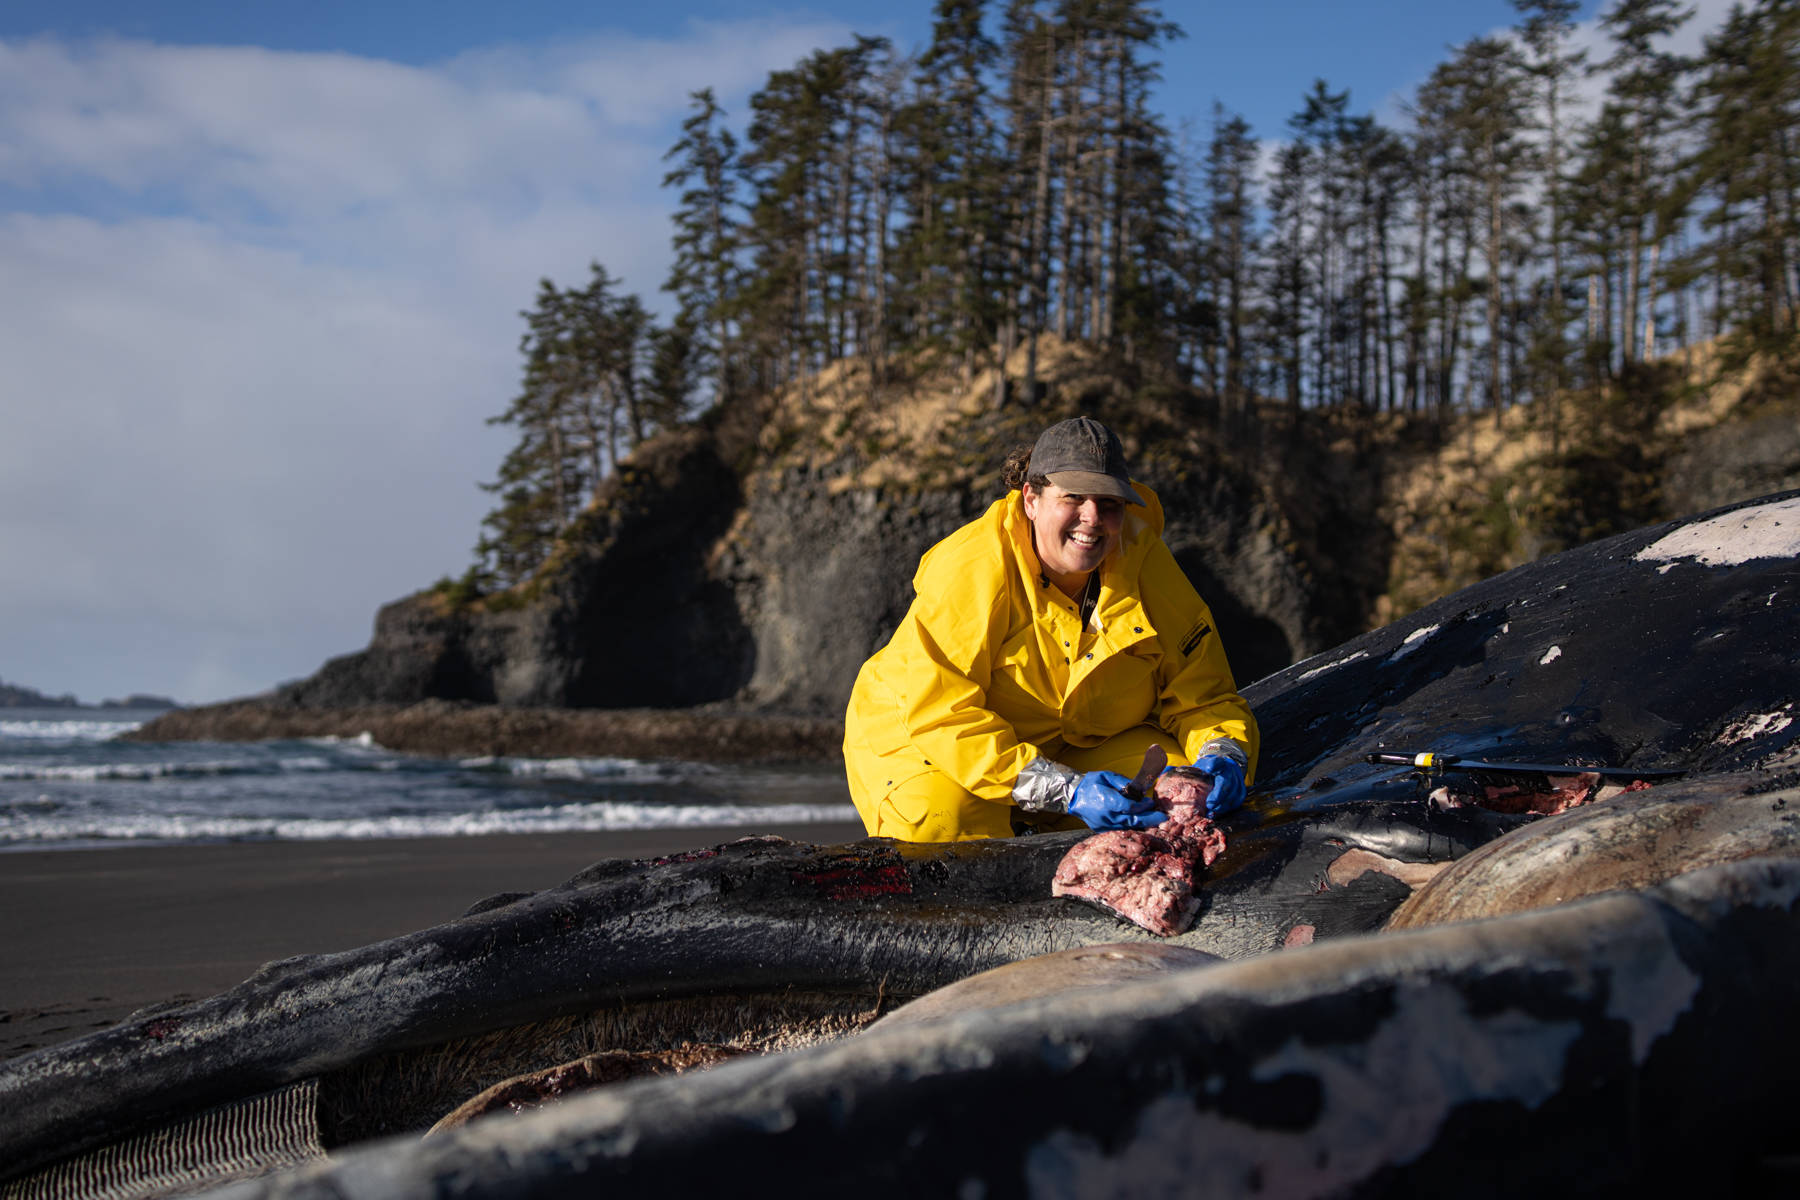 Stacey Golden, Sitka School District science teacher, assists with a recent whale necropsy near Sitka. (Courtesy Photo / Bethany Sonsini Goodrich and Lione Clare, operating under NOAA Stranding Agreement MMHSRP #18786-04)